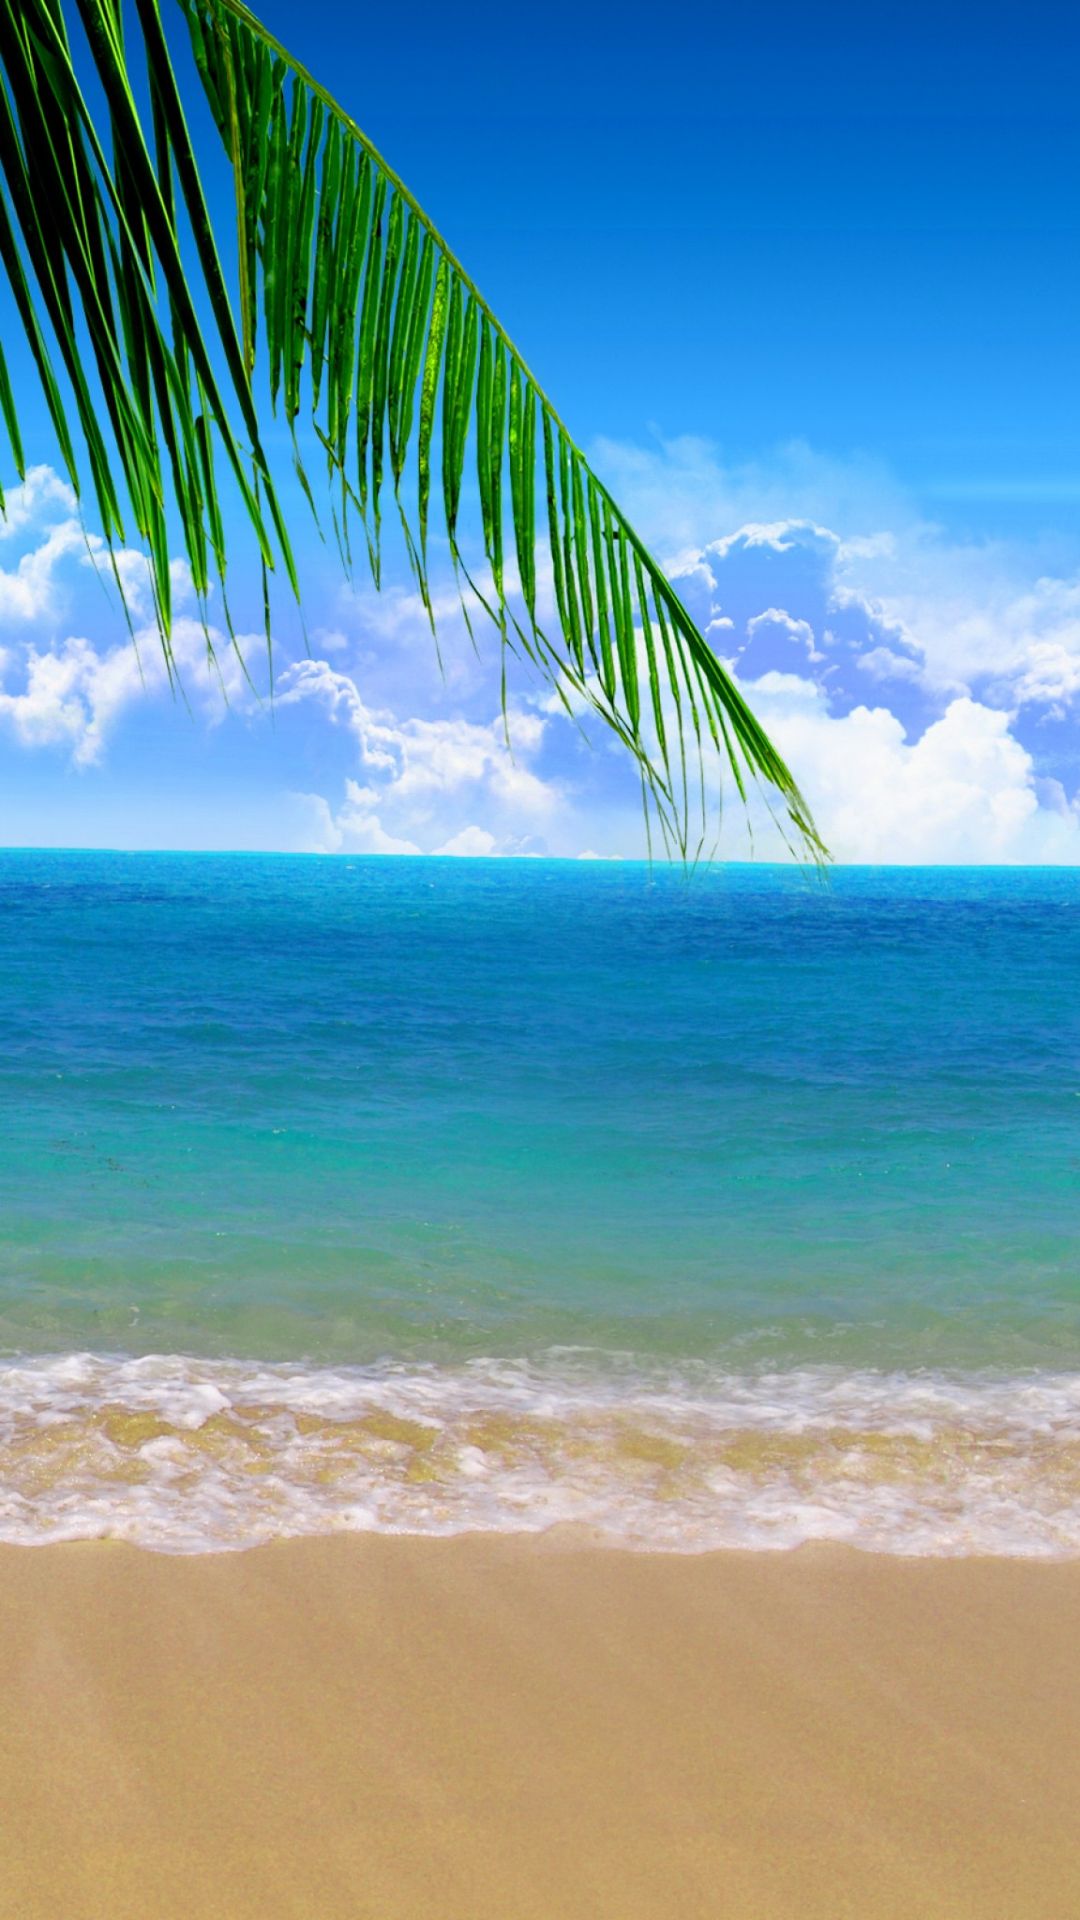 A beach with palm trees and blue water - Beach